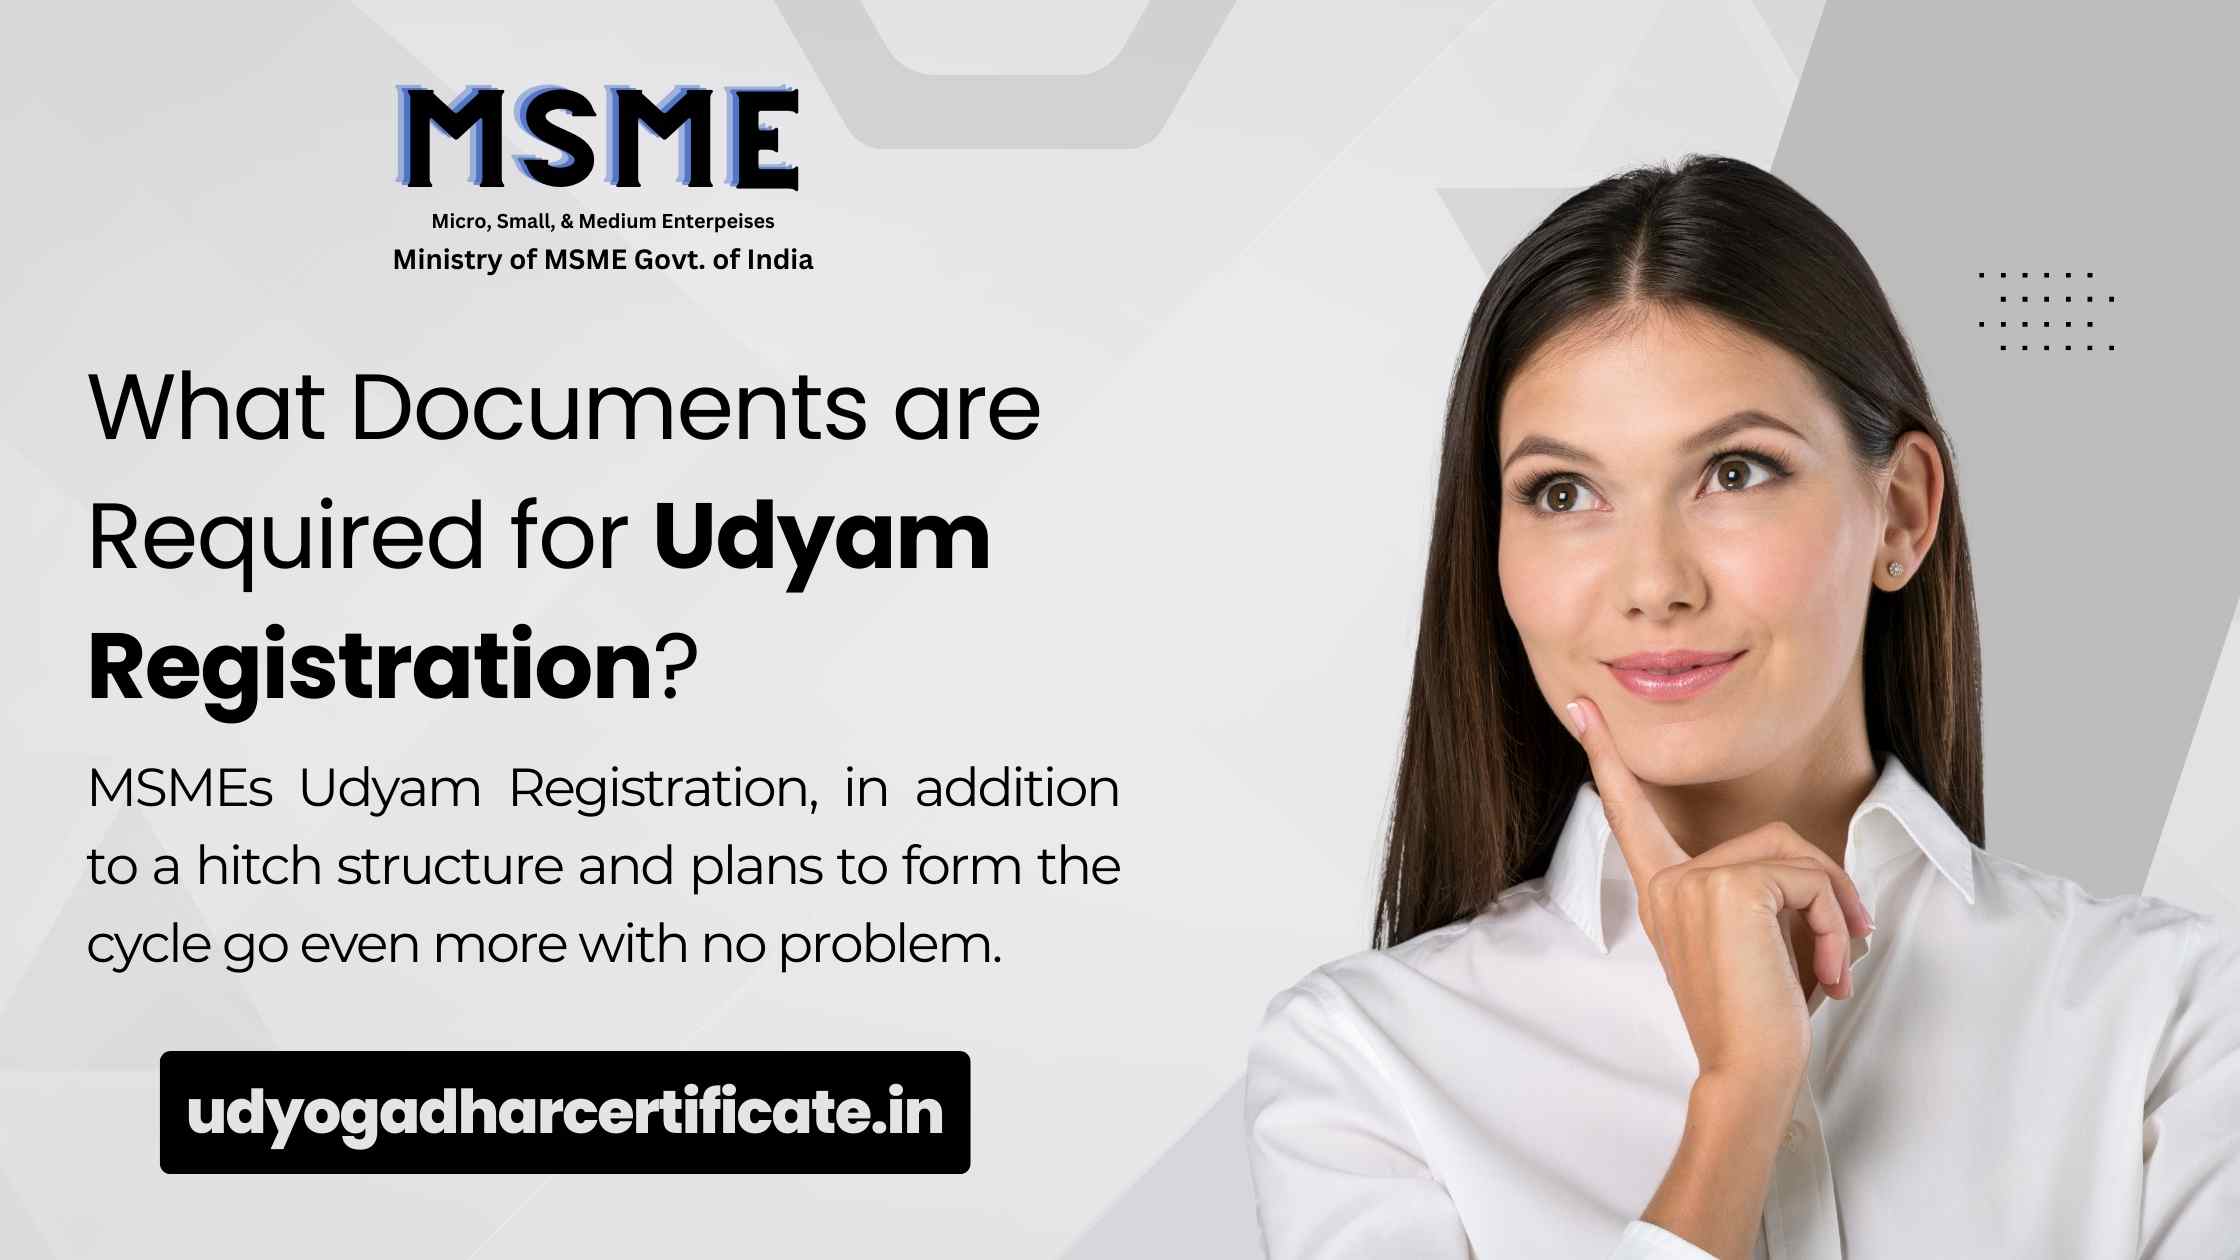 information about Documents Required for Udyam Registration